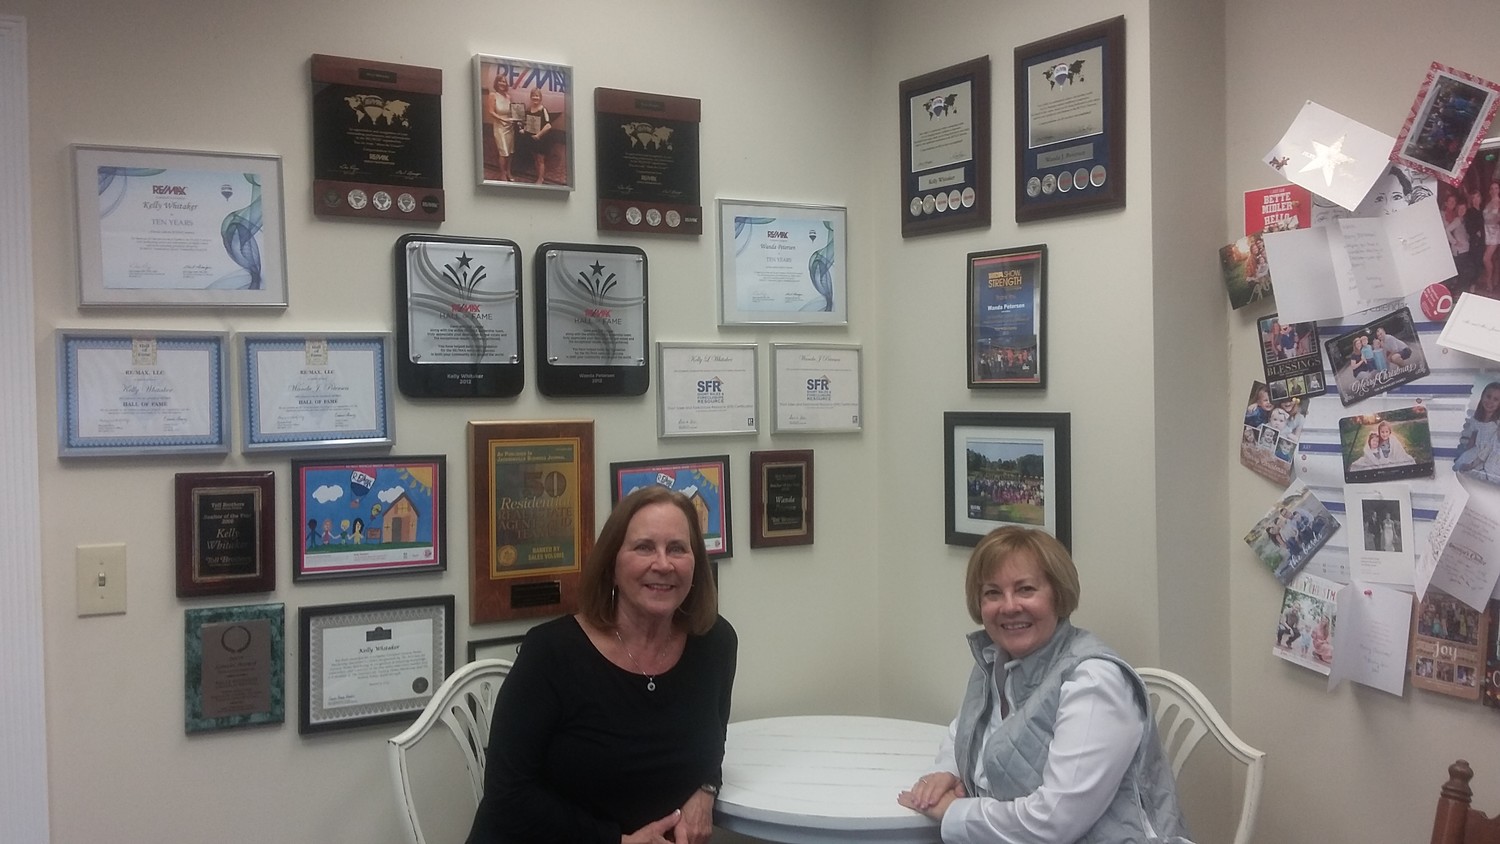 Wanda Peteresen and Kelly Whitaker have accumulated a lot of honors throughout their 20-year partnership.